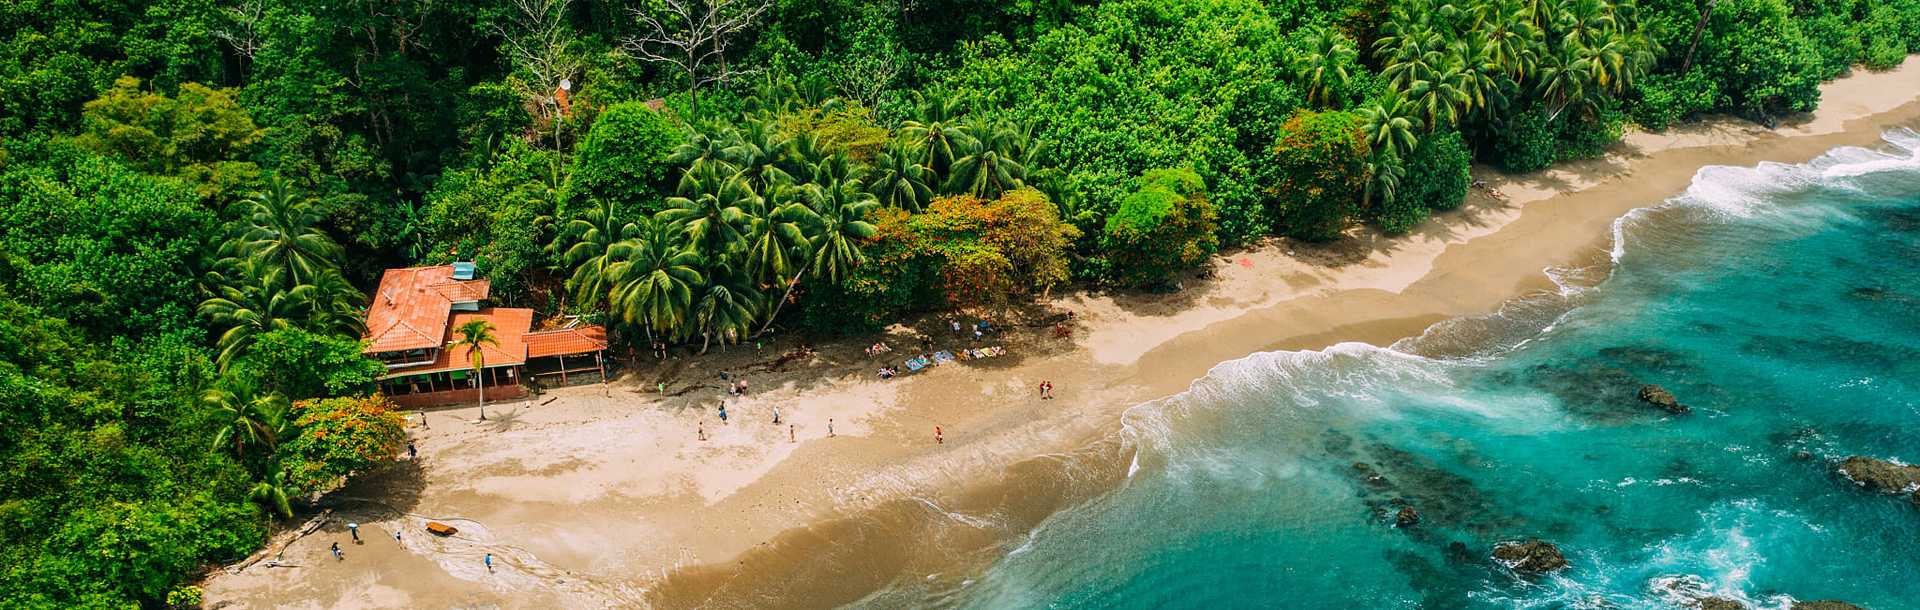 View of a tropical island, Isla del Caño, on the Pacific side of Costa Rica.